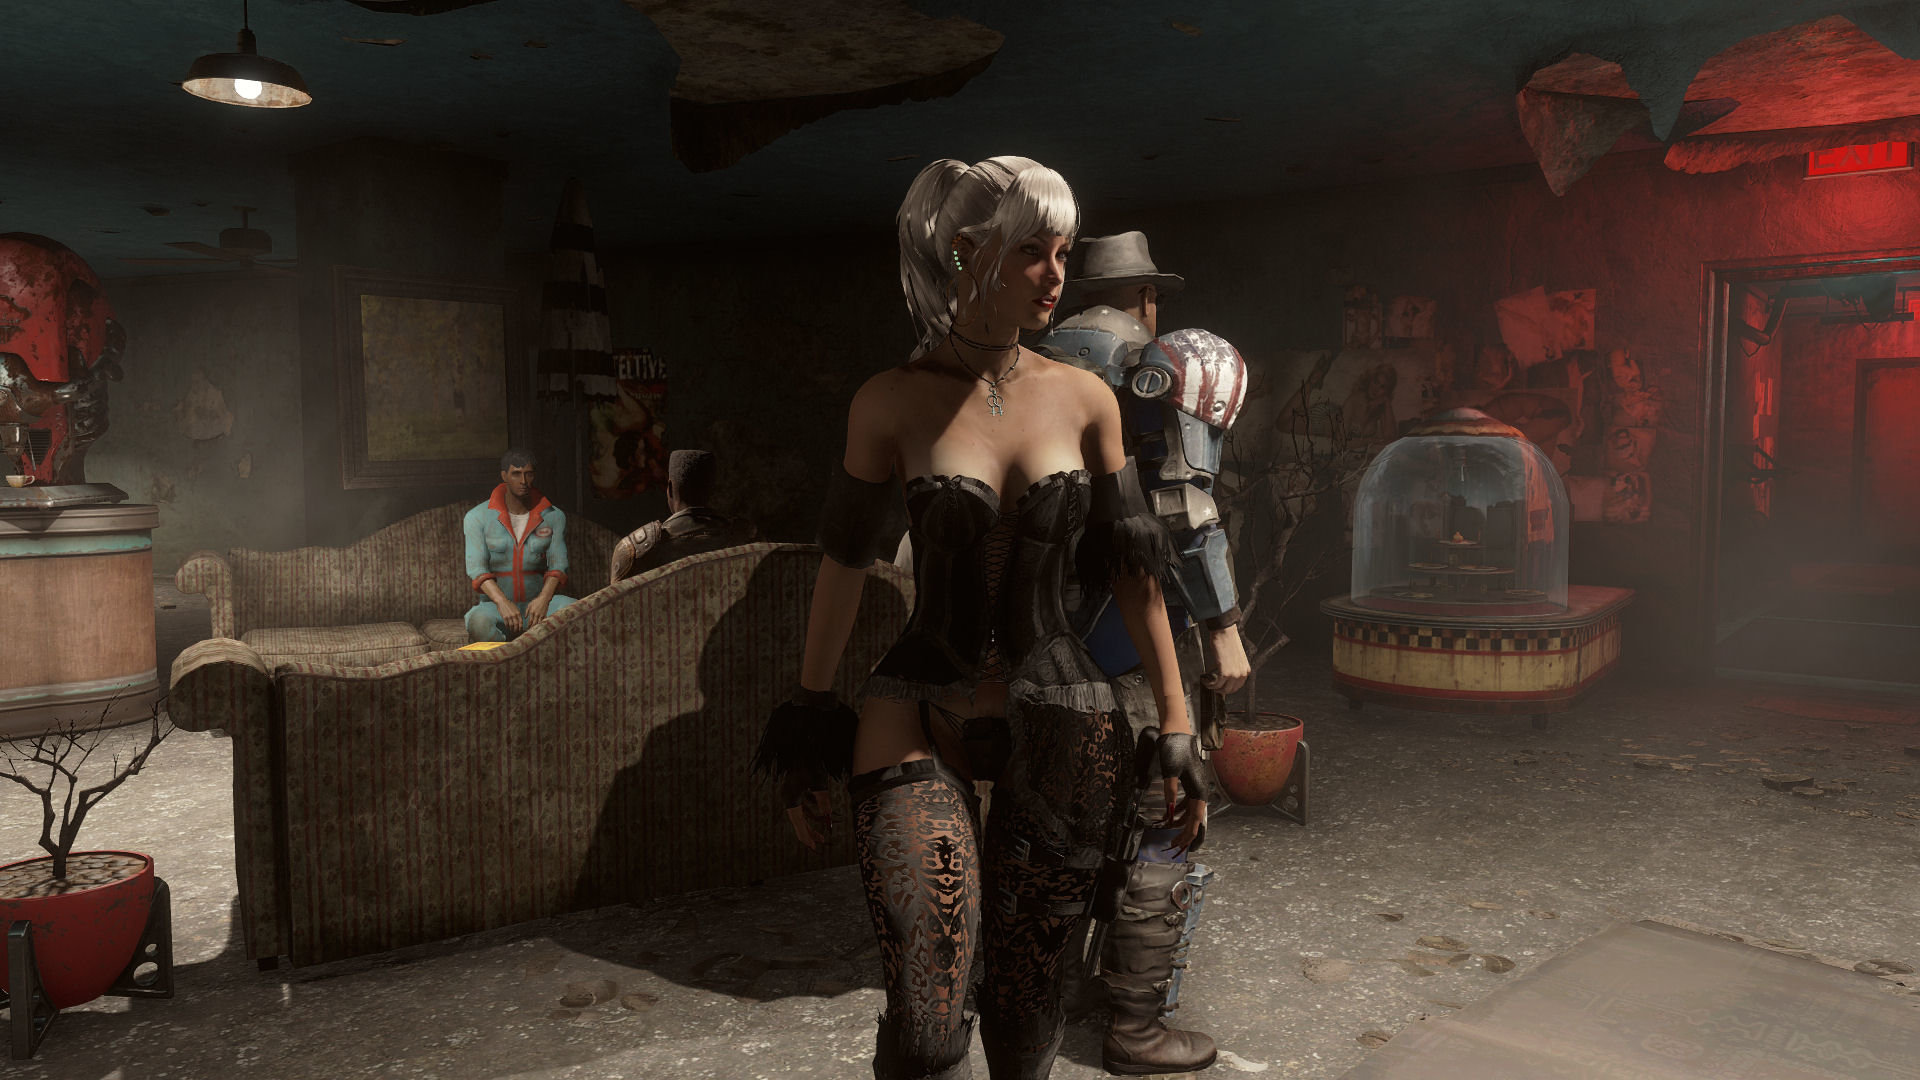 Most of these fallout 4 mods are goofy, but there are a few graphics mods t...